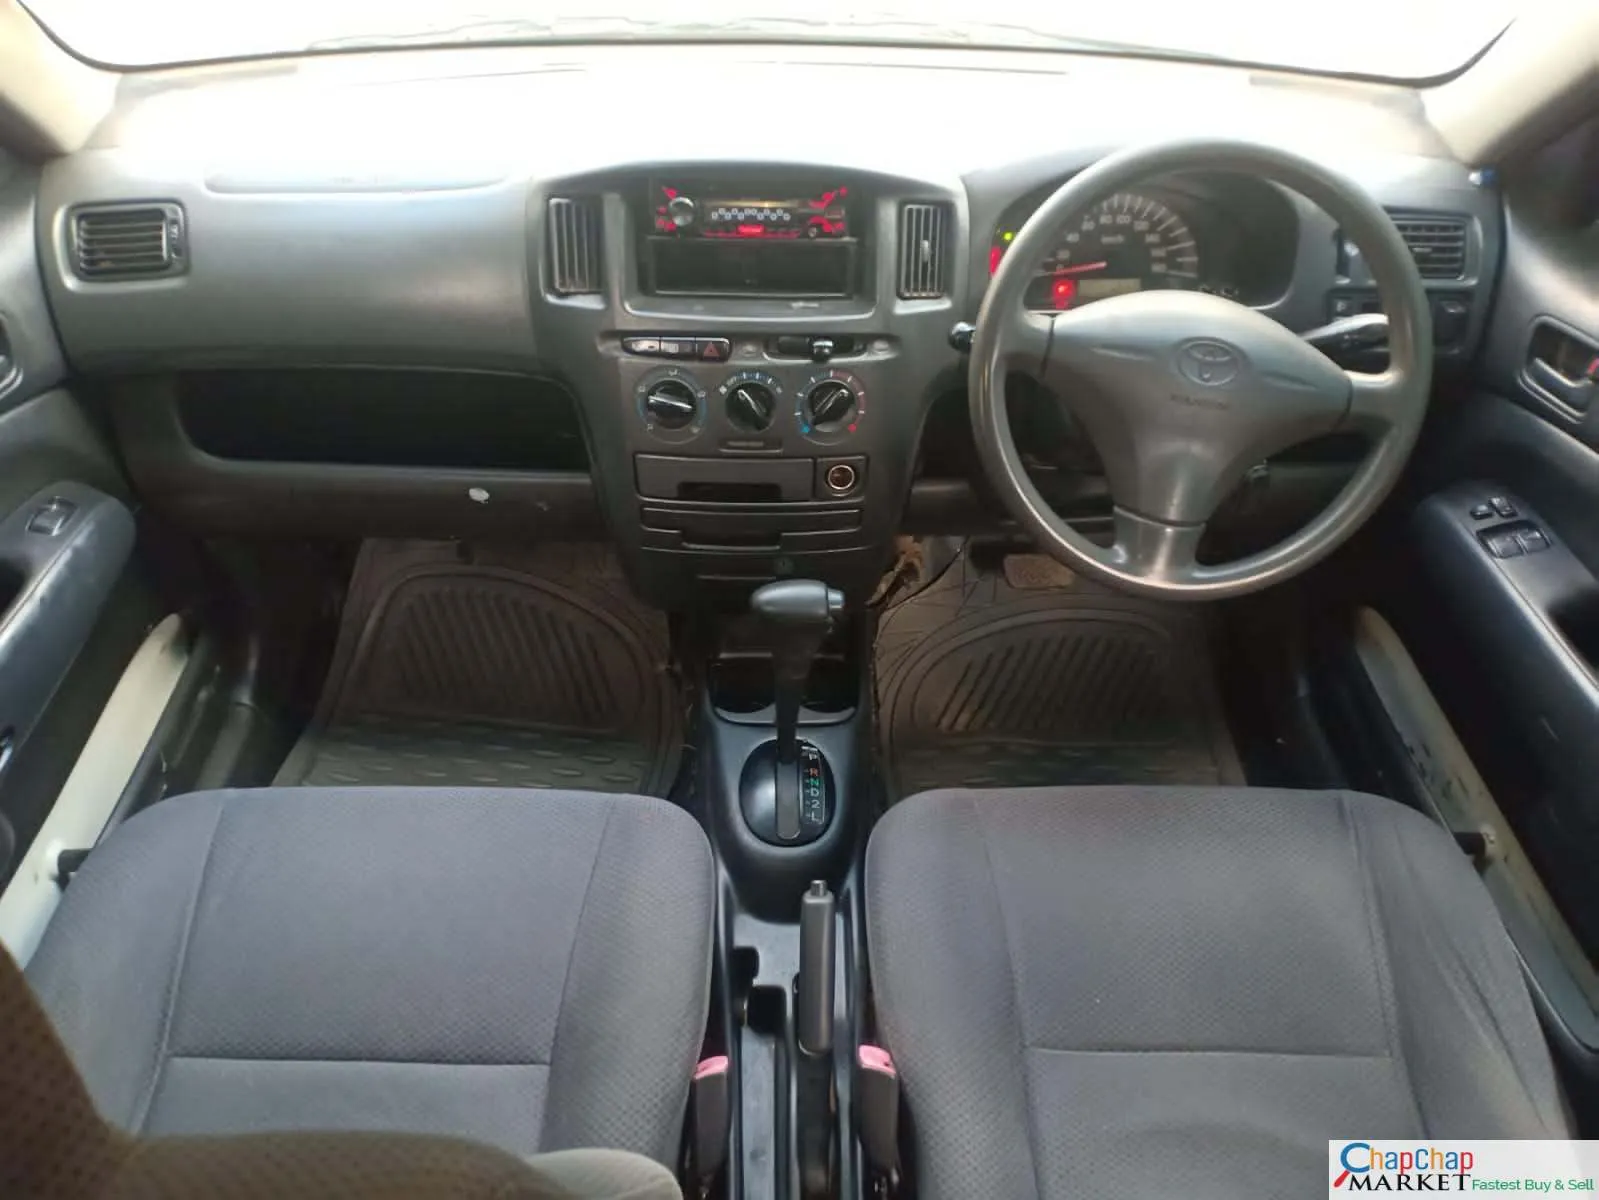 Toyota 100 for sale in Kenya auto 240K ONLY You pay 30% Deposit Trade in Ok EXCLUSIVE